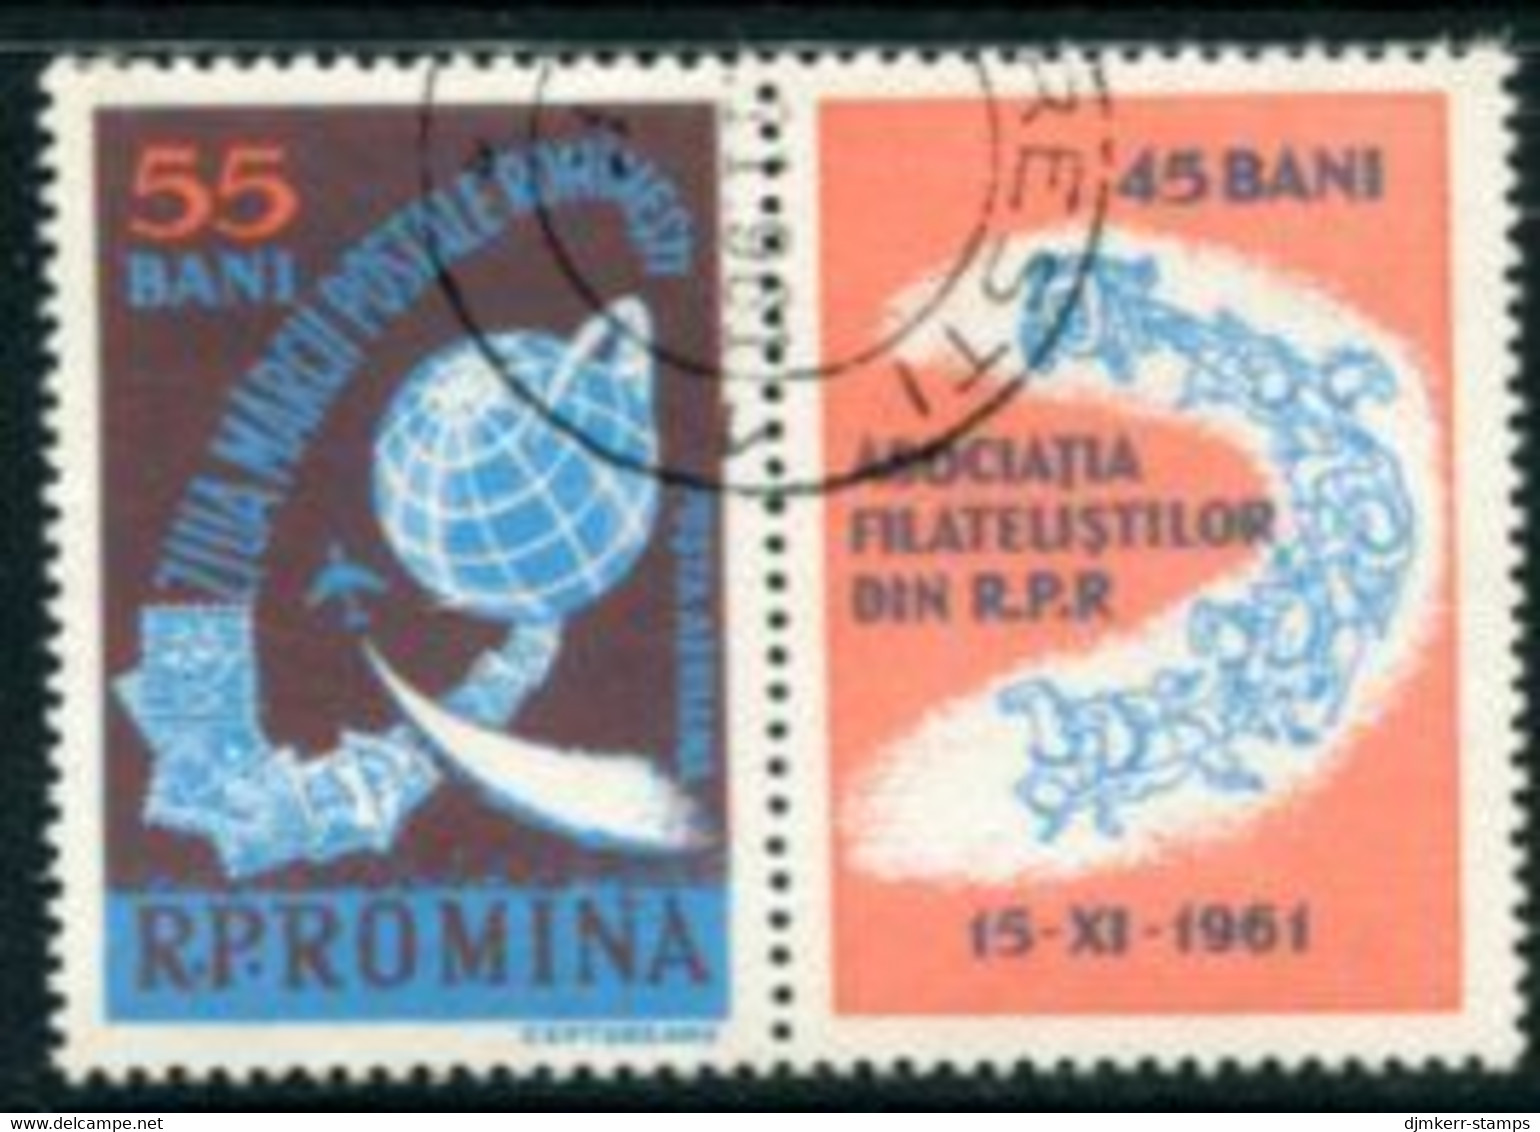 ROMANIA 1961 Stamp Day Used.  Michel 2009 - Used Stamps